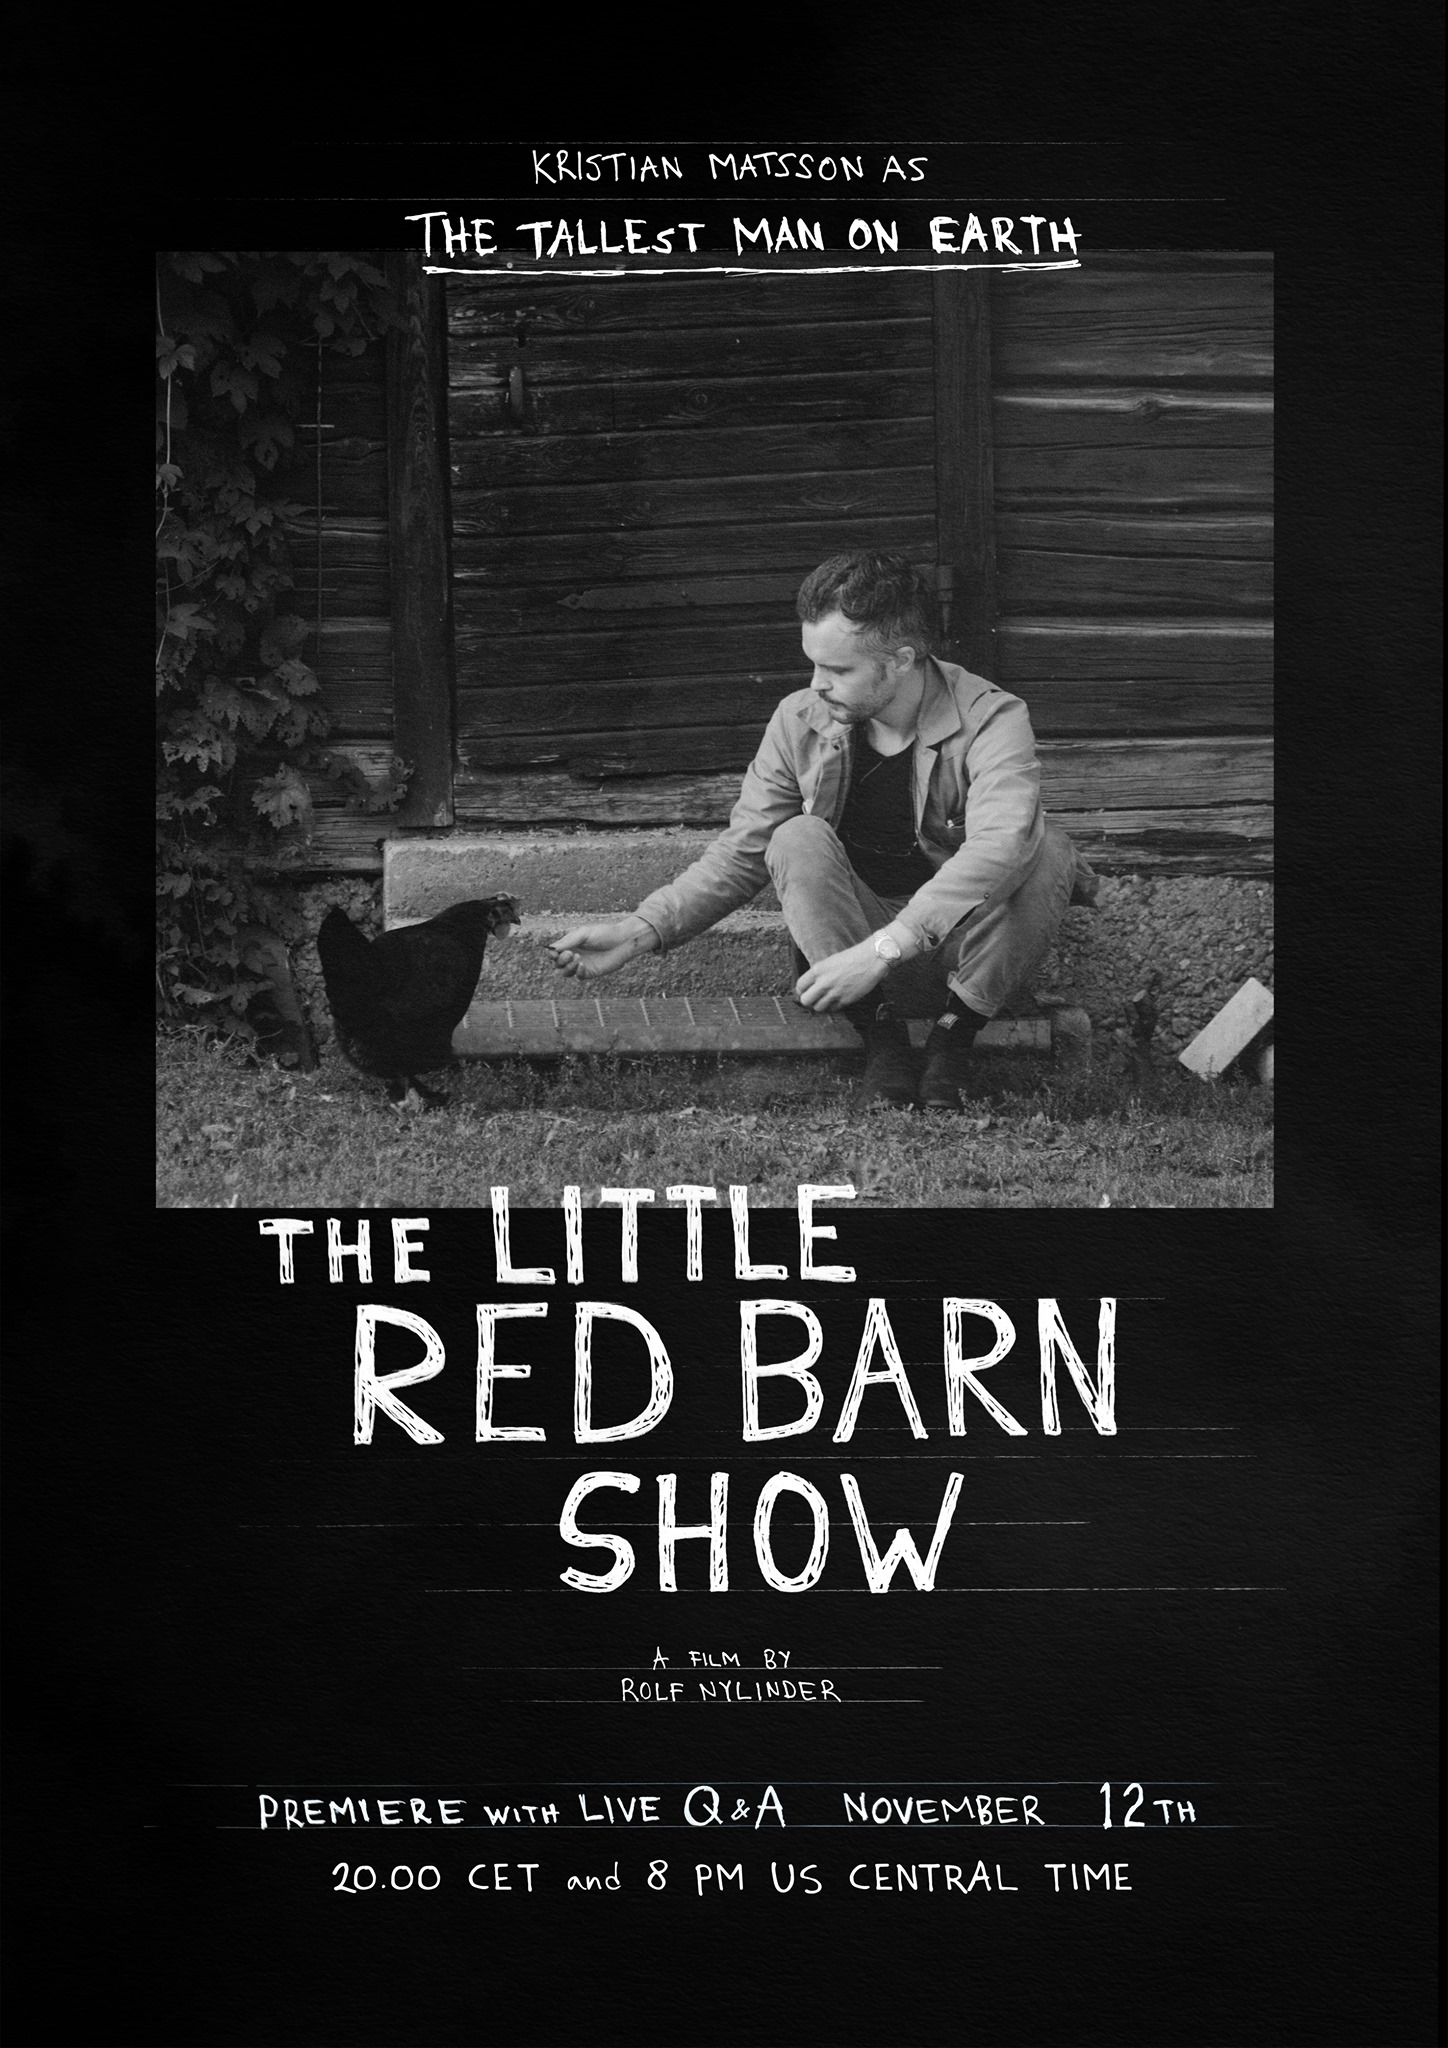 The Tallest Man On Earth - The Little Red Barn Show